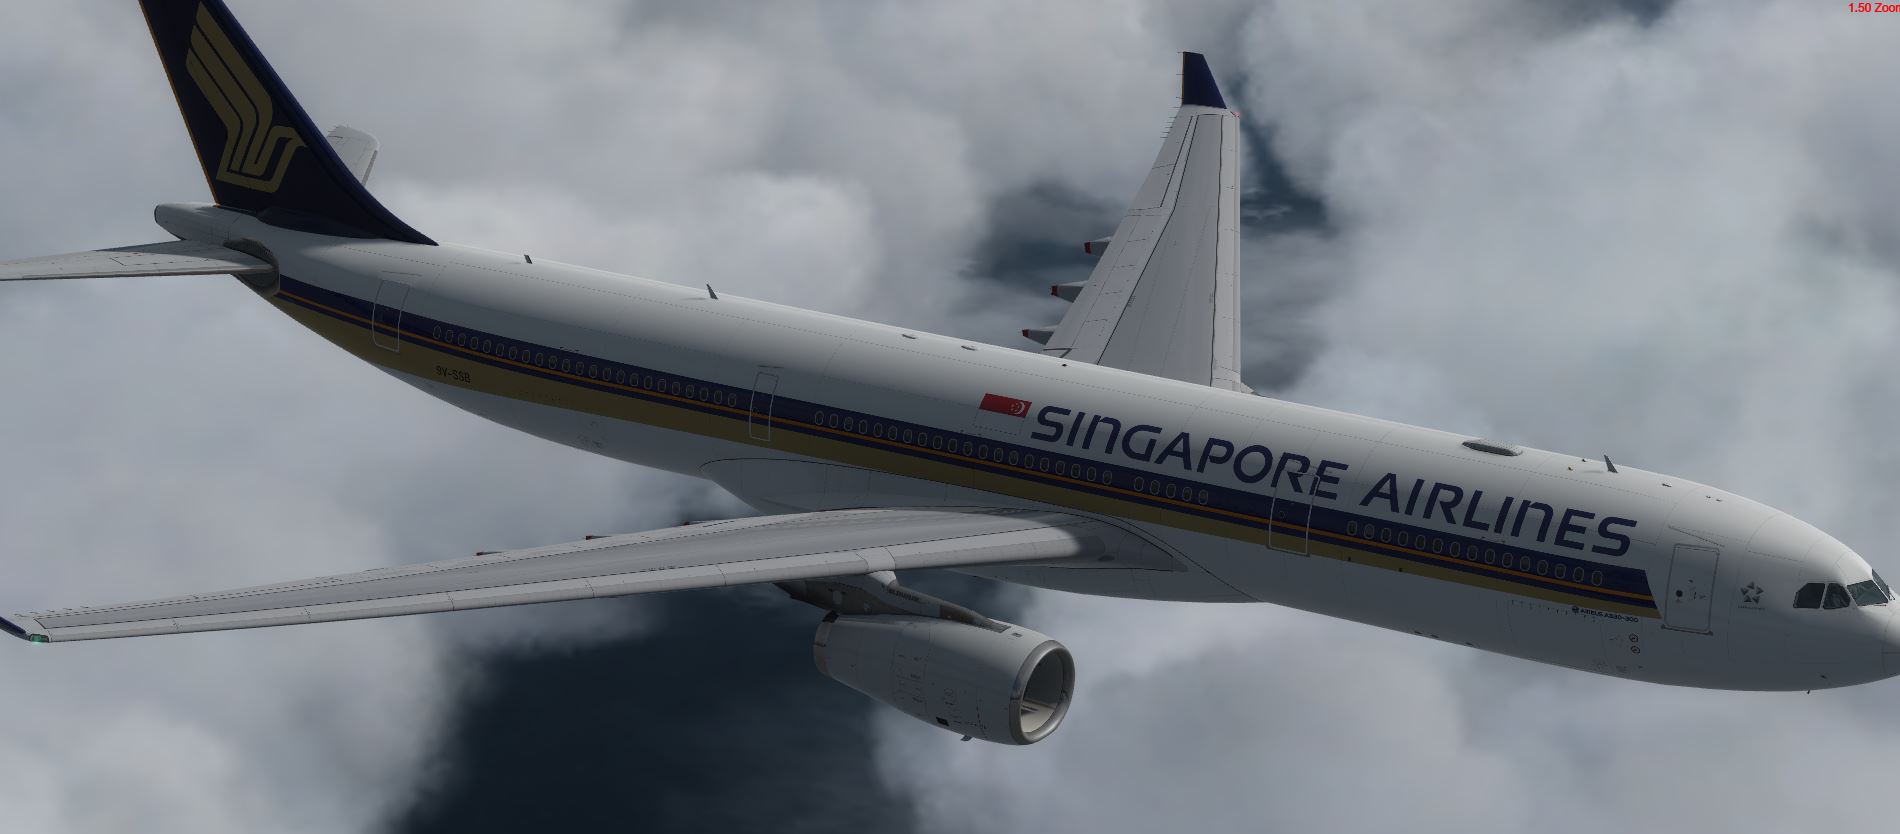 AS A330 Singapore Airlines-8282 